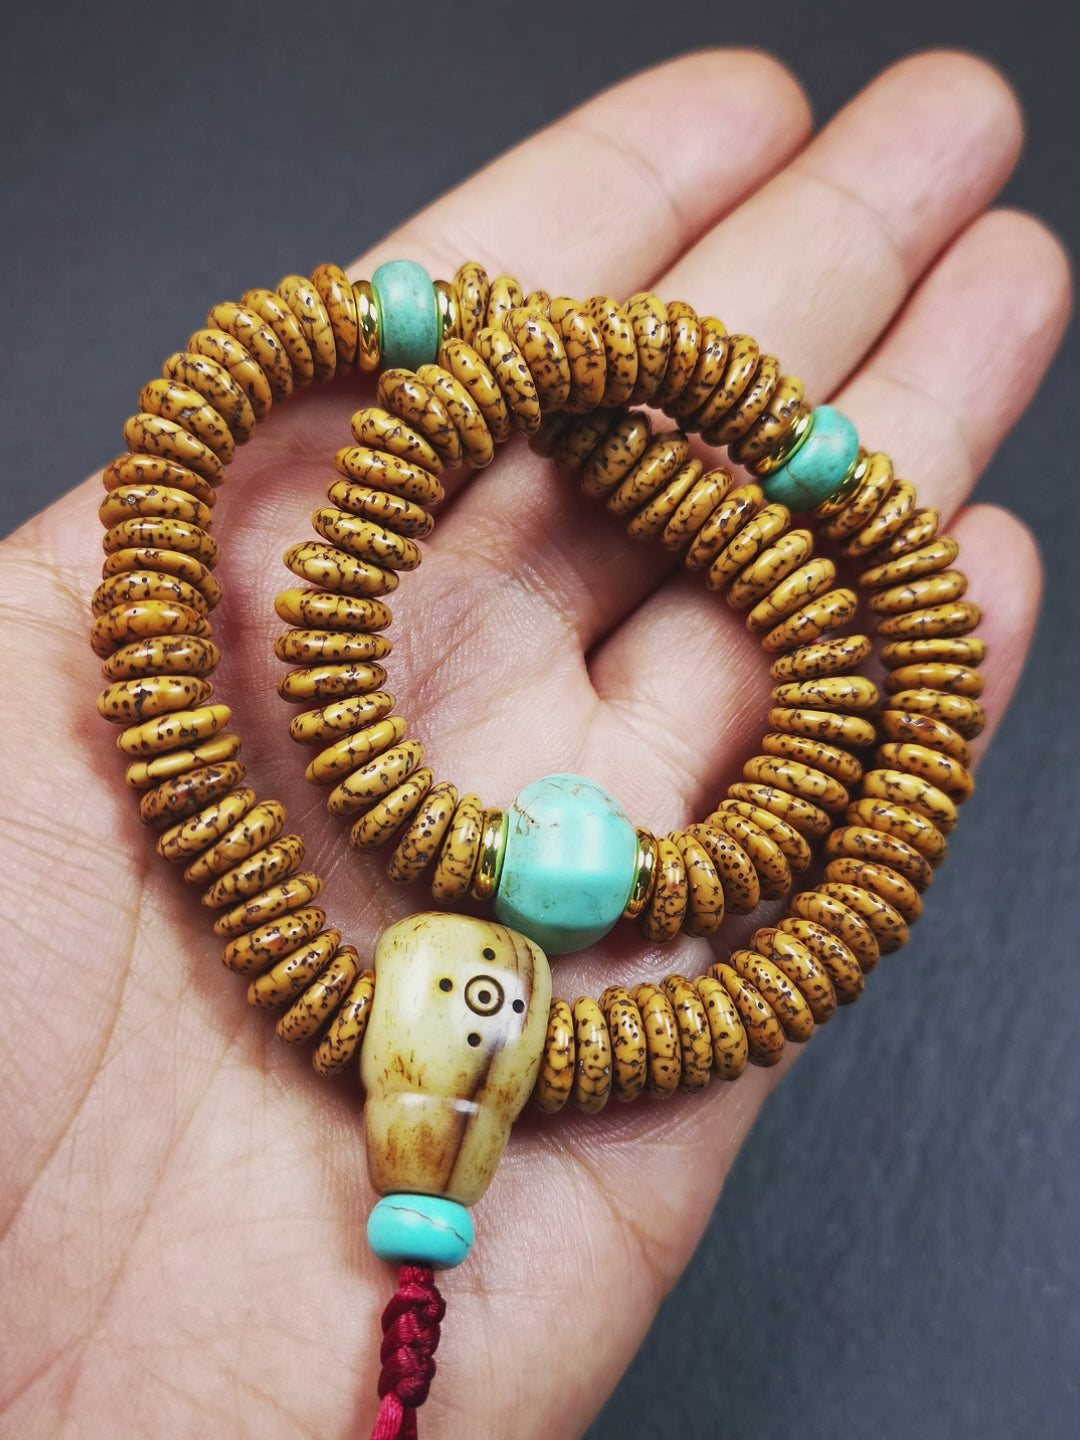 This flat lotus seed mala was collected from Gerze county,about 30 years old,hold and blessed by a lama. It is composed of 108 bodhi seed beads, flat cut shape,brown color,with 4 turquoise beads and 1 yak bone guru bead.